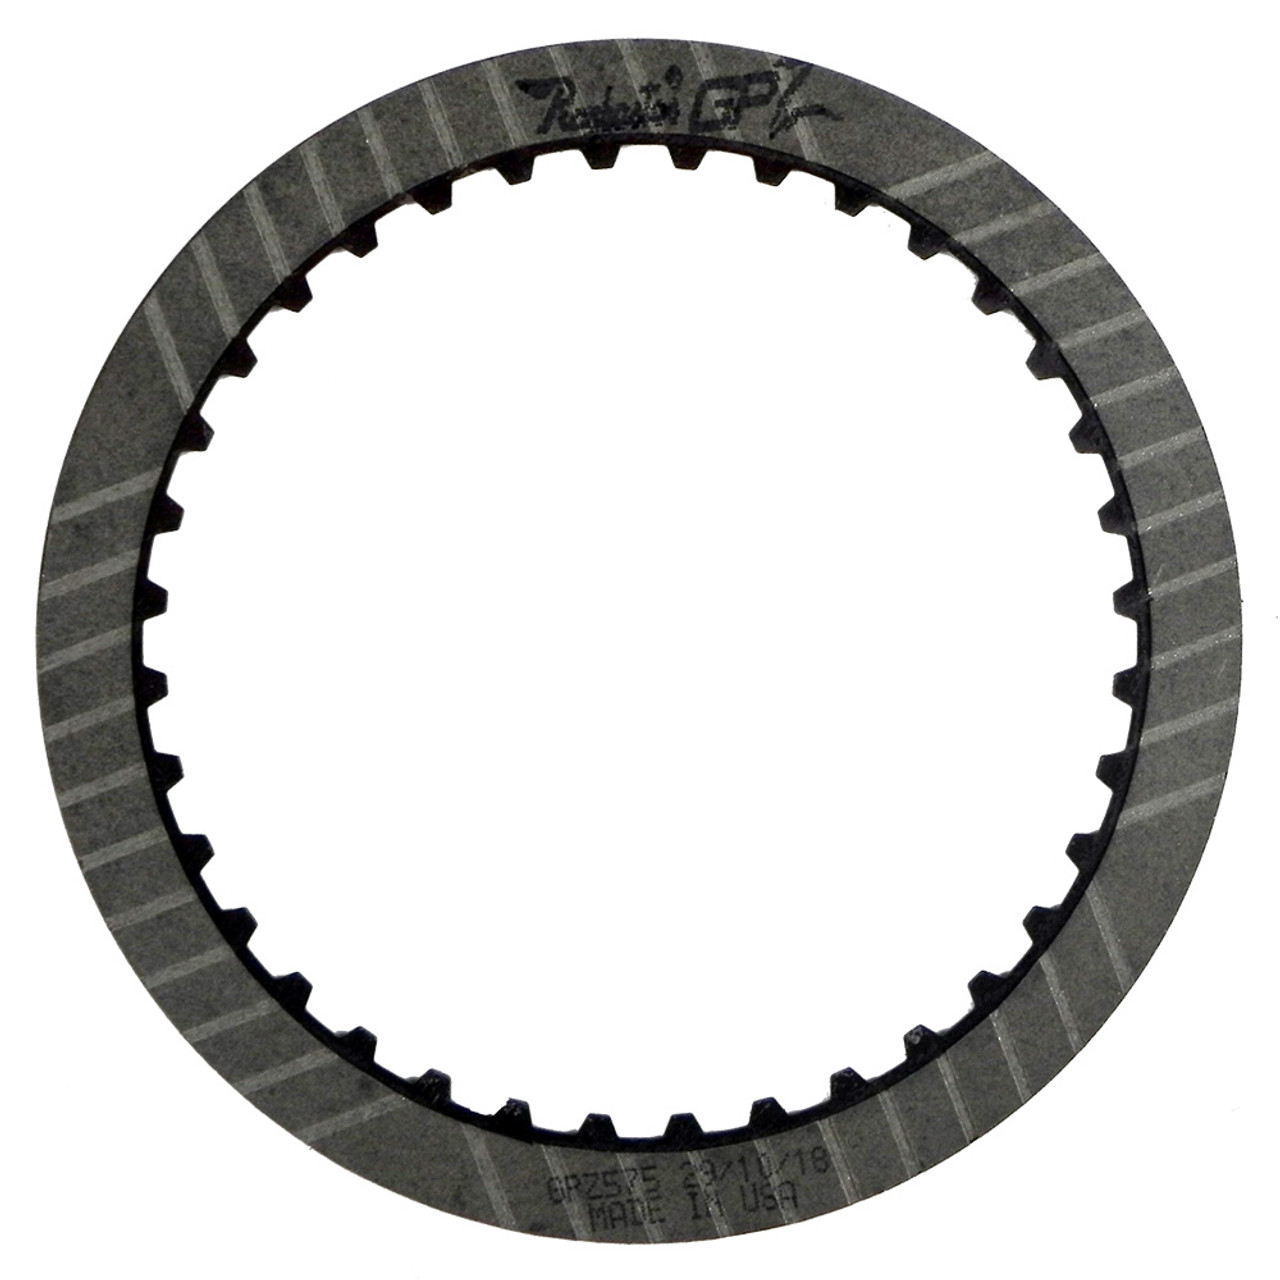 GPZ575 features Made In USA GPZ friction material and is a replacement for the 24224158 6L80, 6L90 4th, 5th, 6th GPZ Friction Clutch Plate.